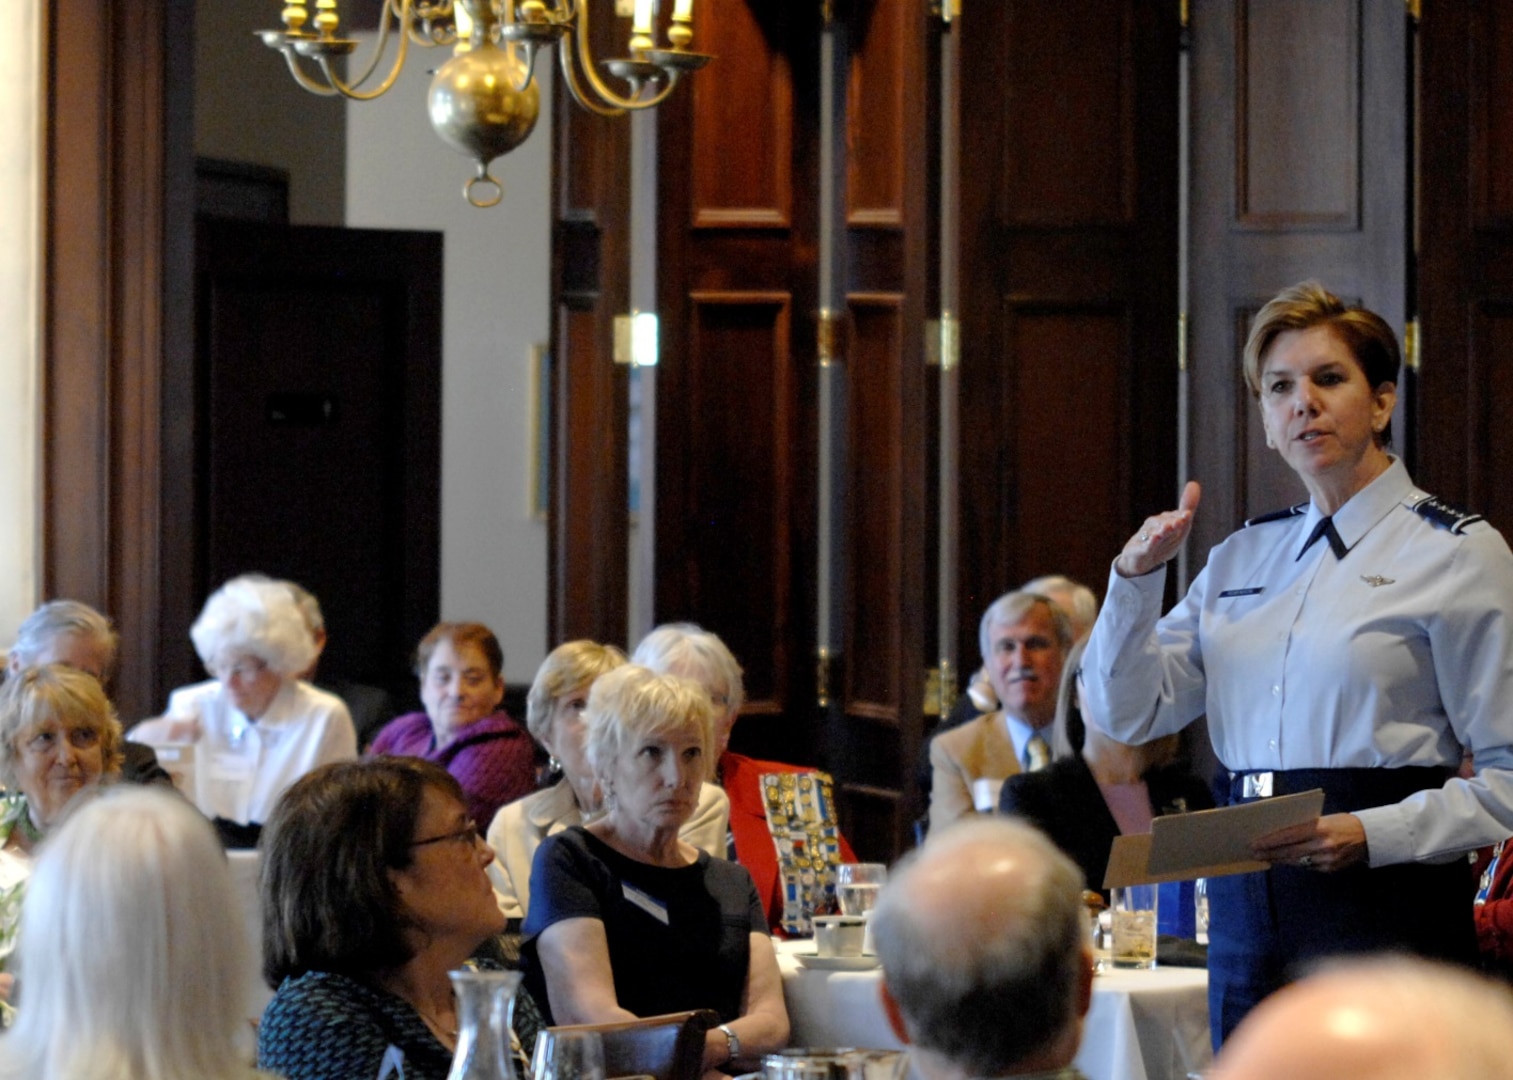 General Lori Robinson, North American Aerospace Defense Command and U.S. Northern Command commander, spoke to a full house Saturday afternoon at the Zebulon Pike Chapter of the Daughters of the American Revolution meeting.  More than 80 members, spouses and prospective members gathered at the El Paso Club in downtown Colorado Springs for lunch, socializing and to hear the service’s highest ranking female speak about her role leading the only bi-national command in the world.  The general spoke about the complexity of the Commands’ missions to defend the United States and Canada and the trust she has in the U.S. and Canadian service members who work daily to perform the missions.  Before closing, the general thanked the organization for their continued support of the military and for embracing the service members into the Colorado Springs community. 